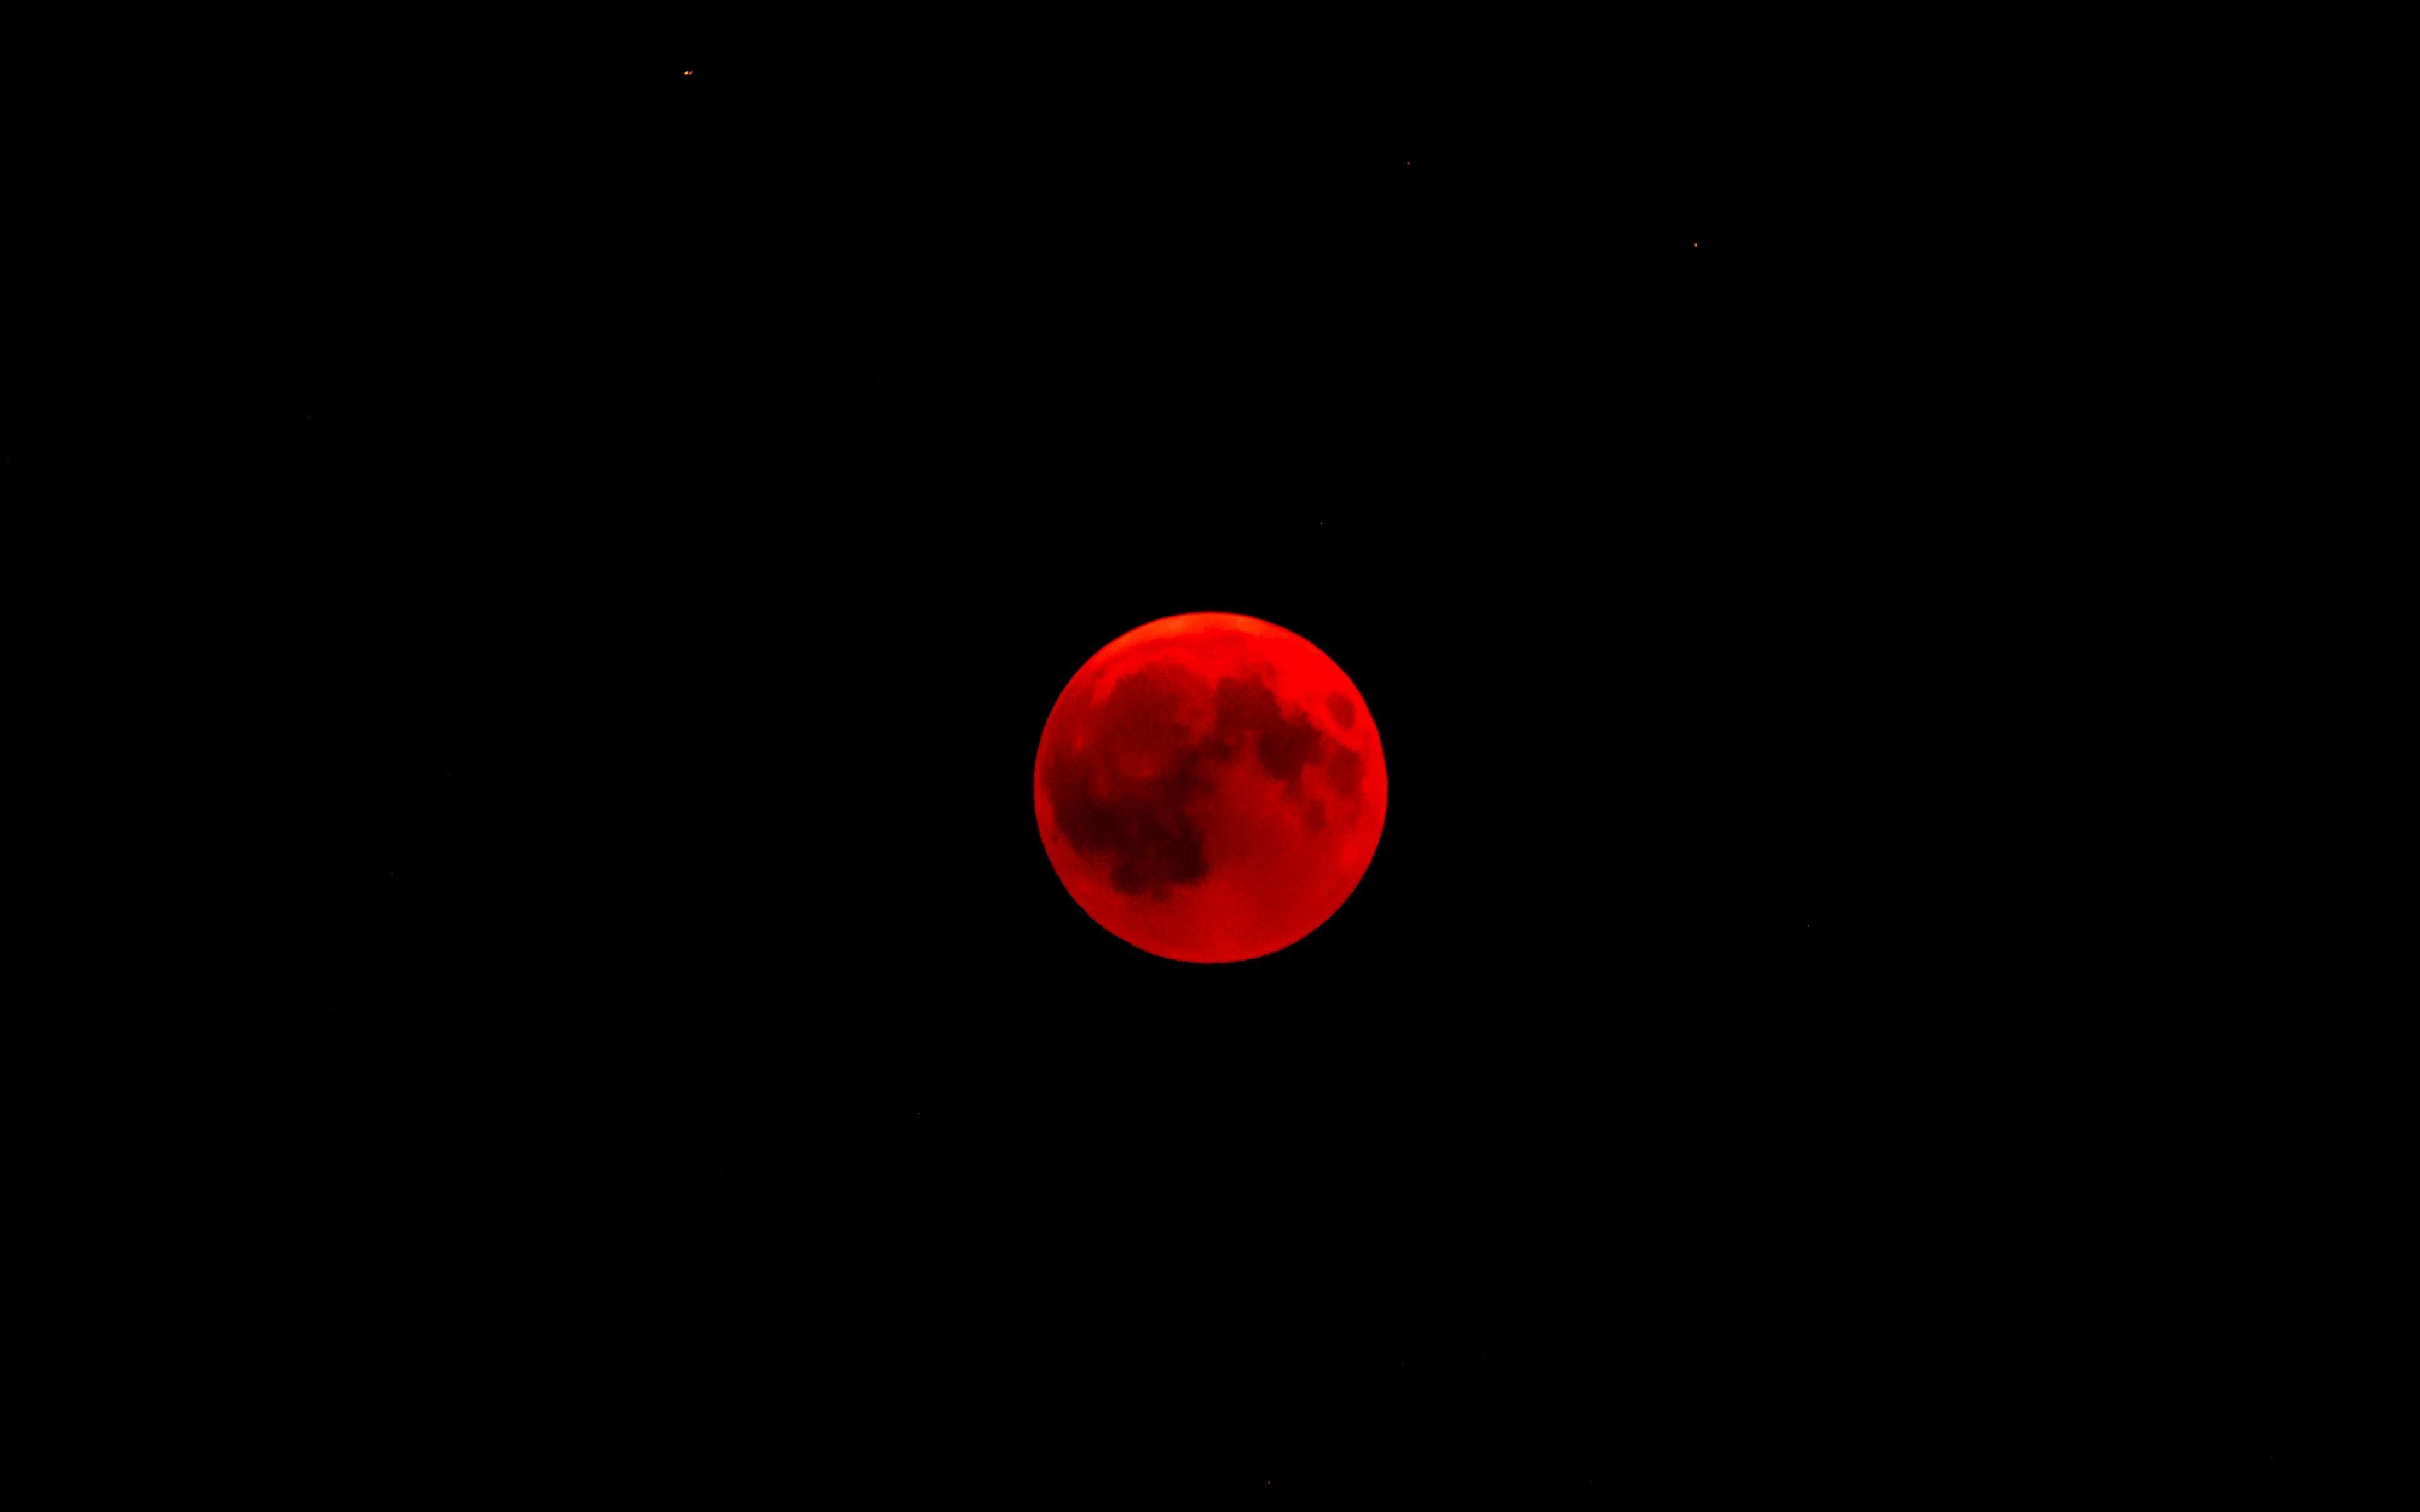 A red full moon is seen in the sky. - Crimson